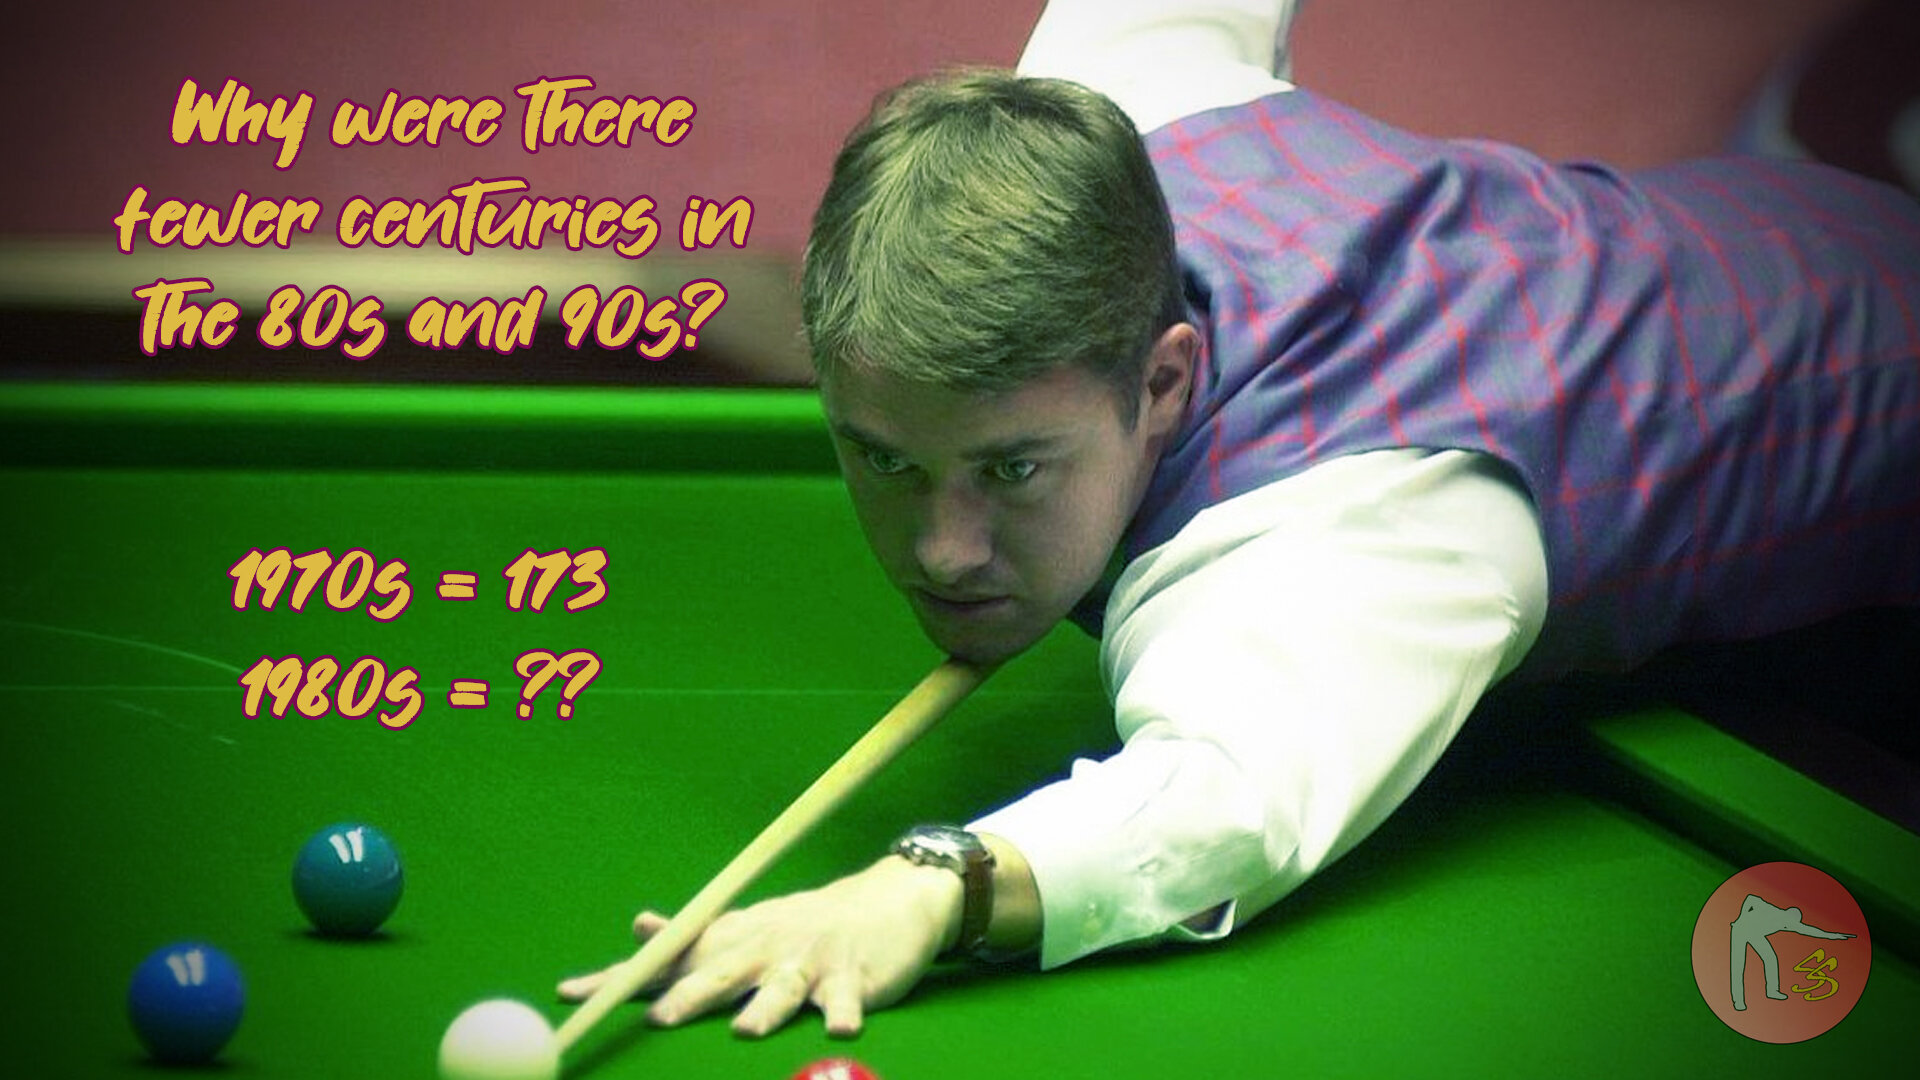 Why Were Snooker Centuries Not As Common Back In The Day? — Snooker Shorts